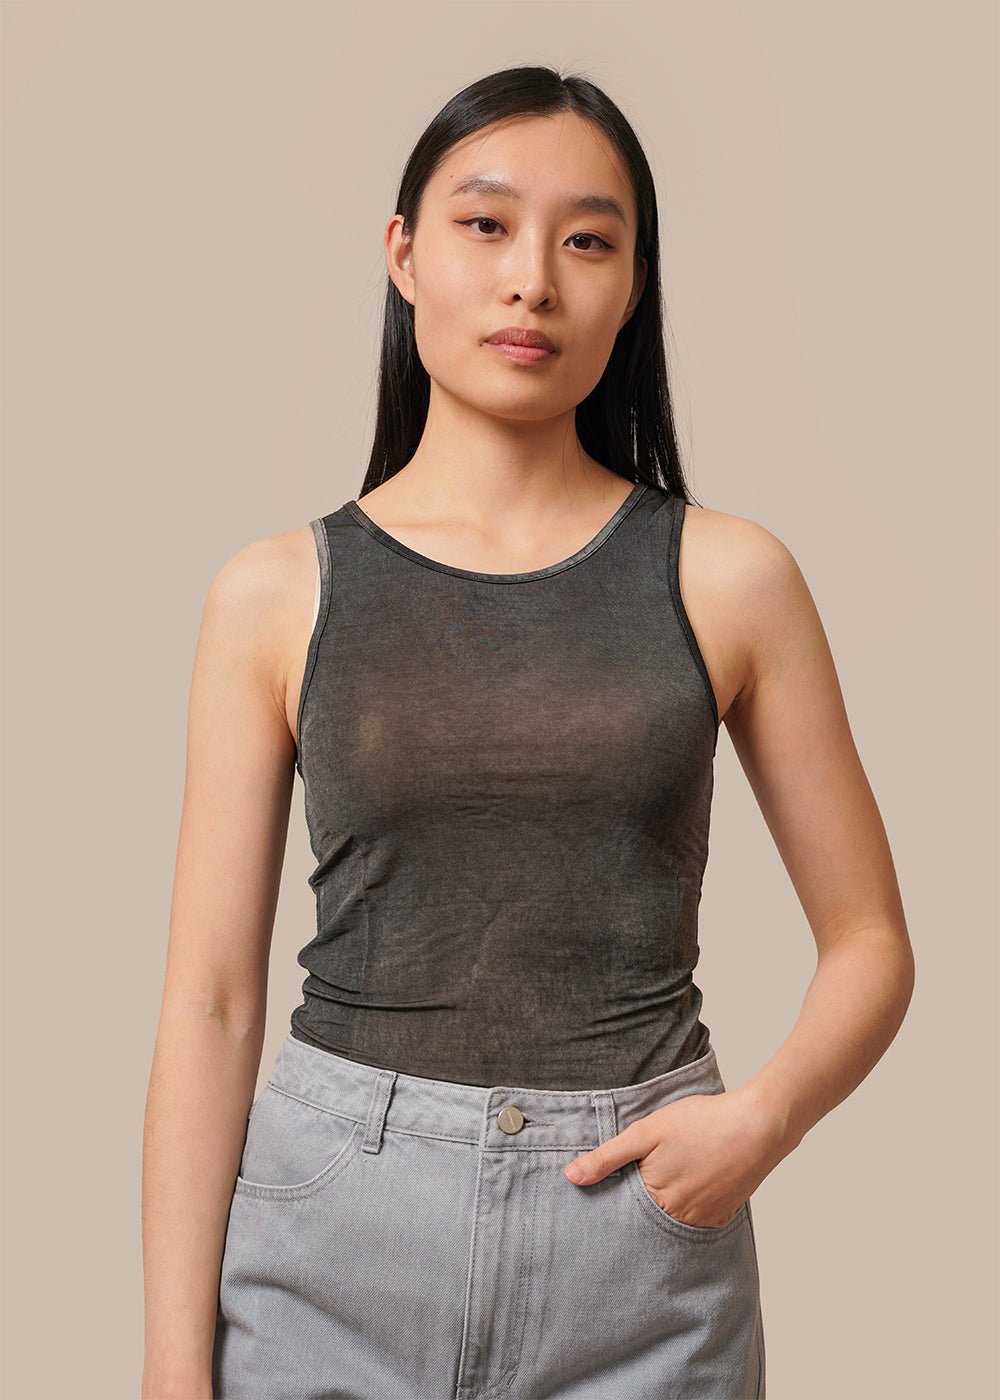 Three Straps Sleeveless Top in Charcoal by AMOMENTO – New Classics Studios